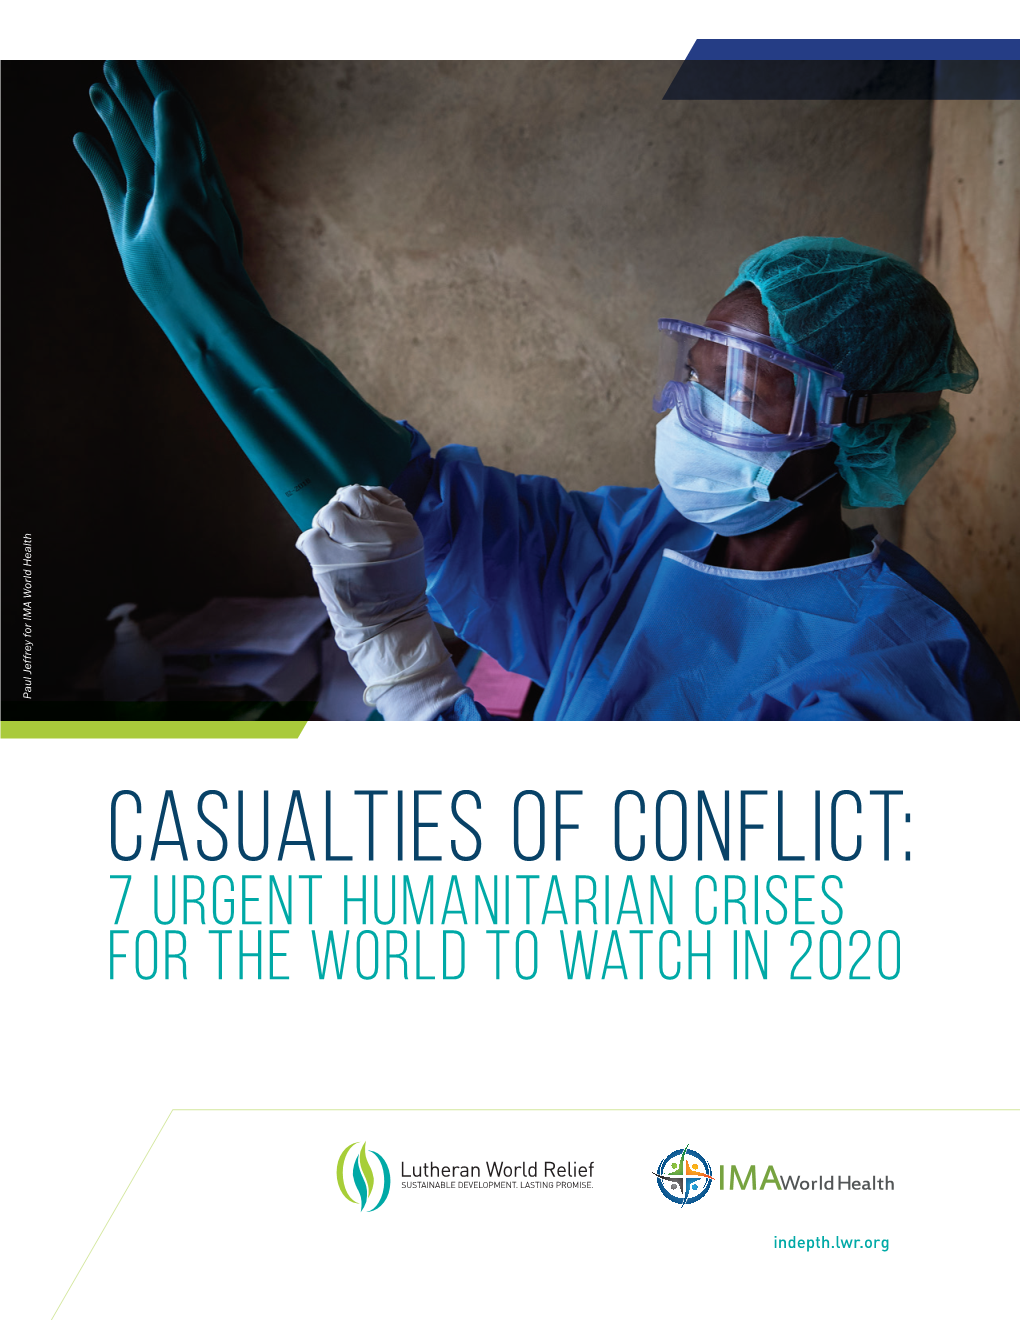 Casualties of Conflict: 7 Urgent Humanitarian Crises for the World to Watch in 2020